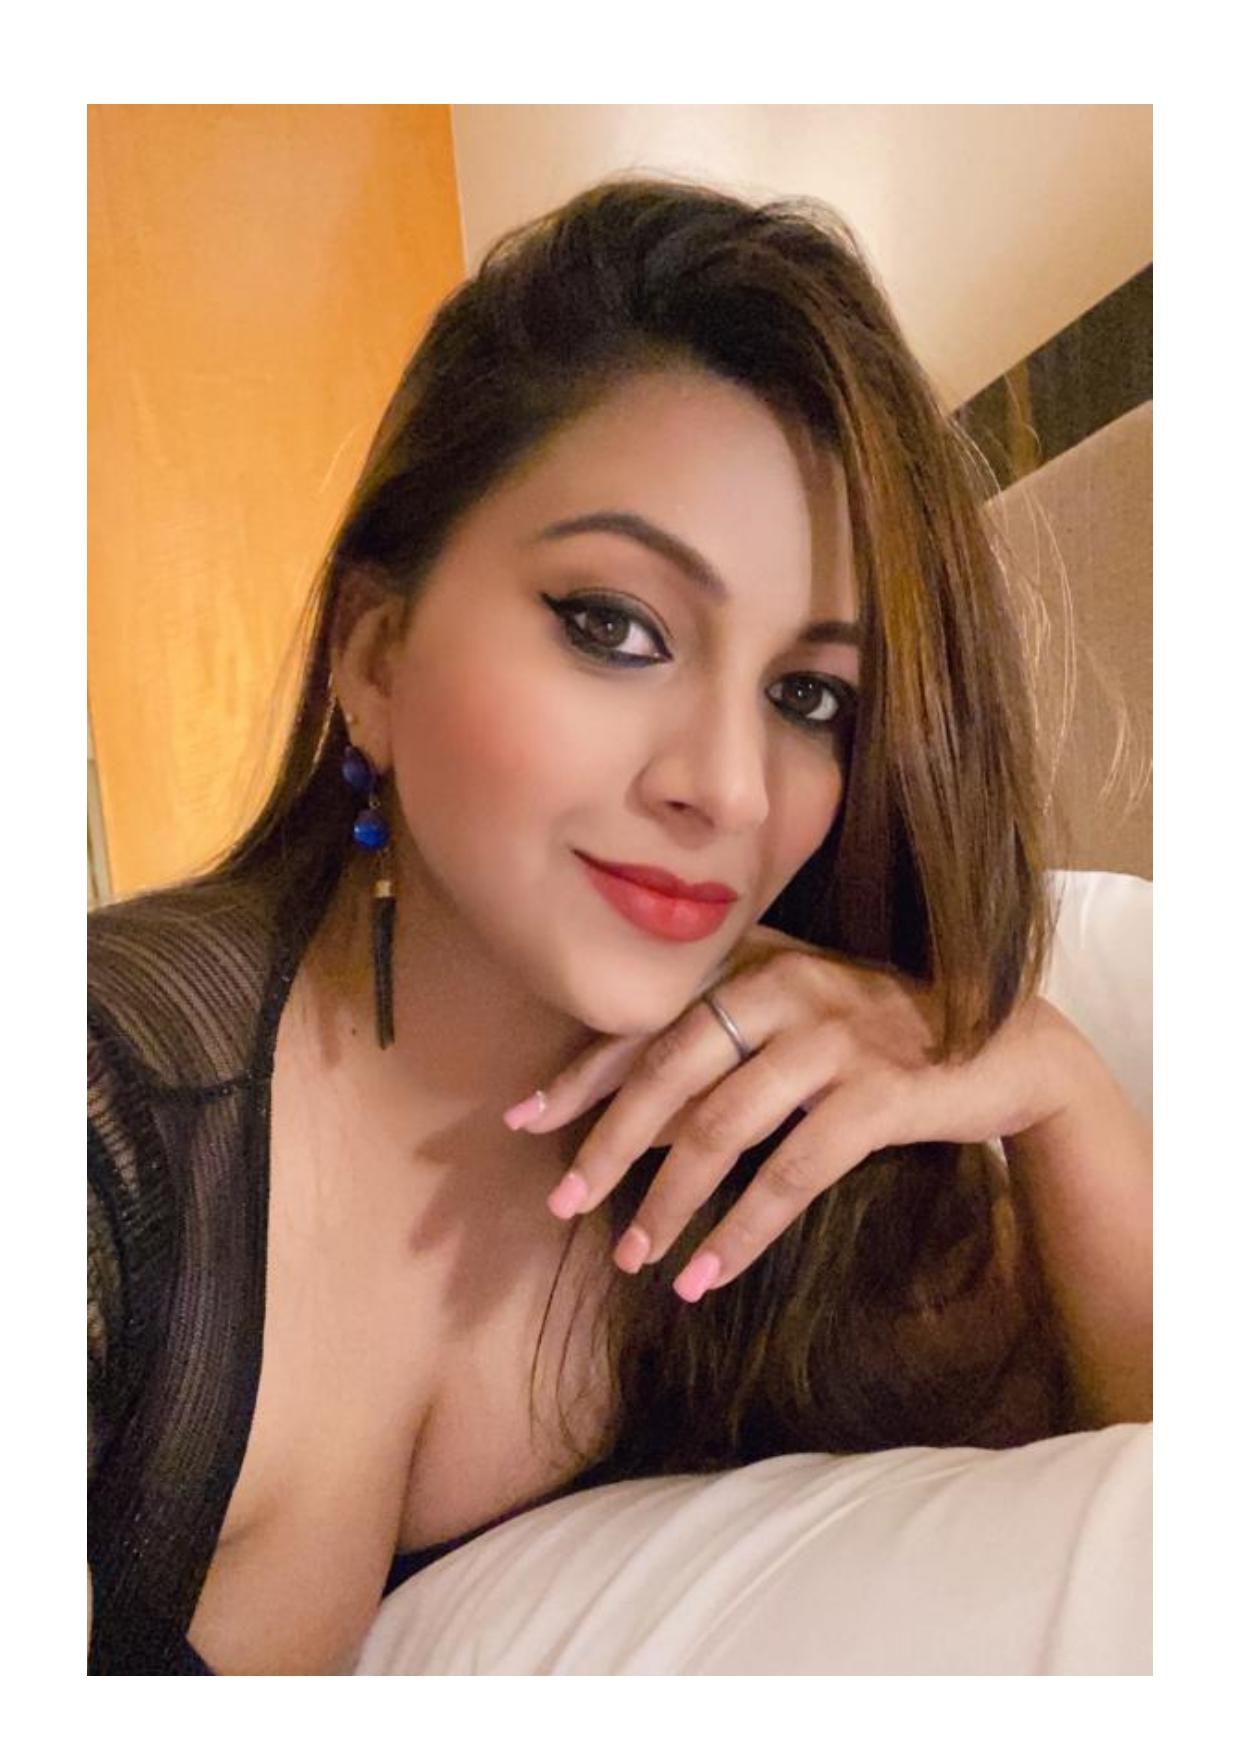 Genuine call girls in bangalore For Friendship And WhatsApp Number